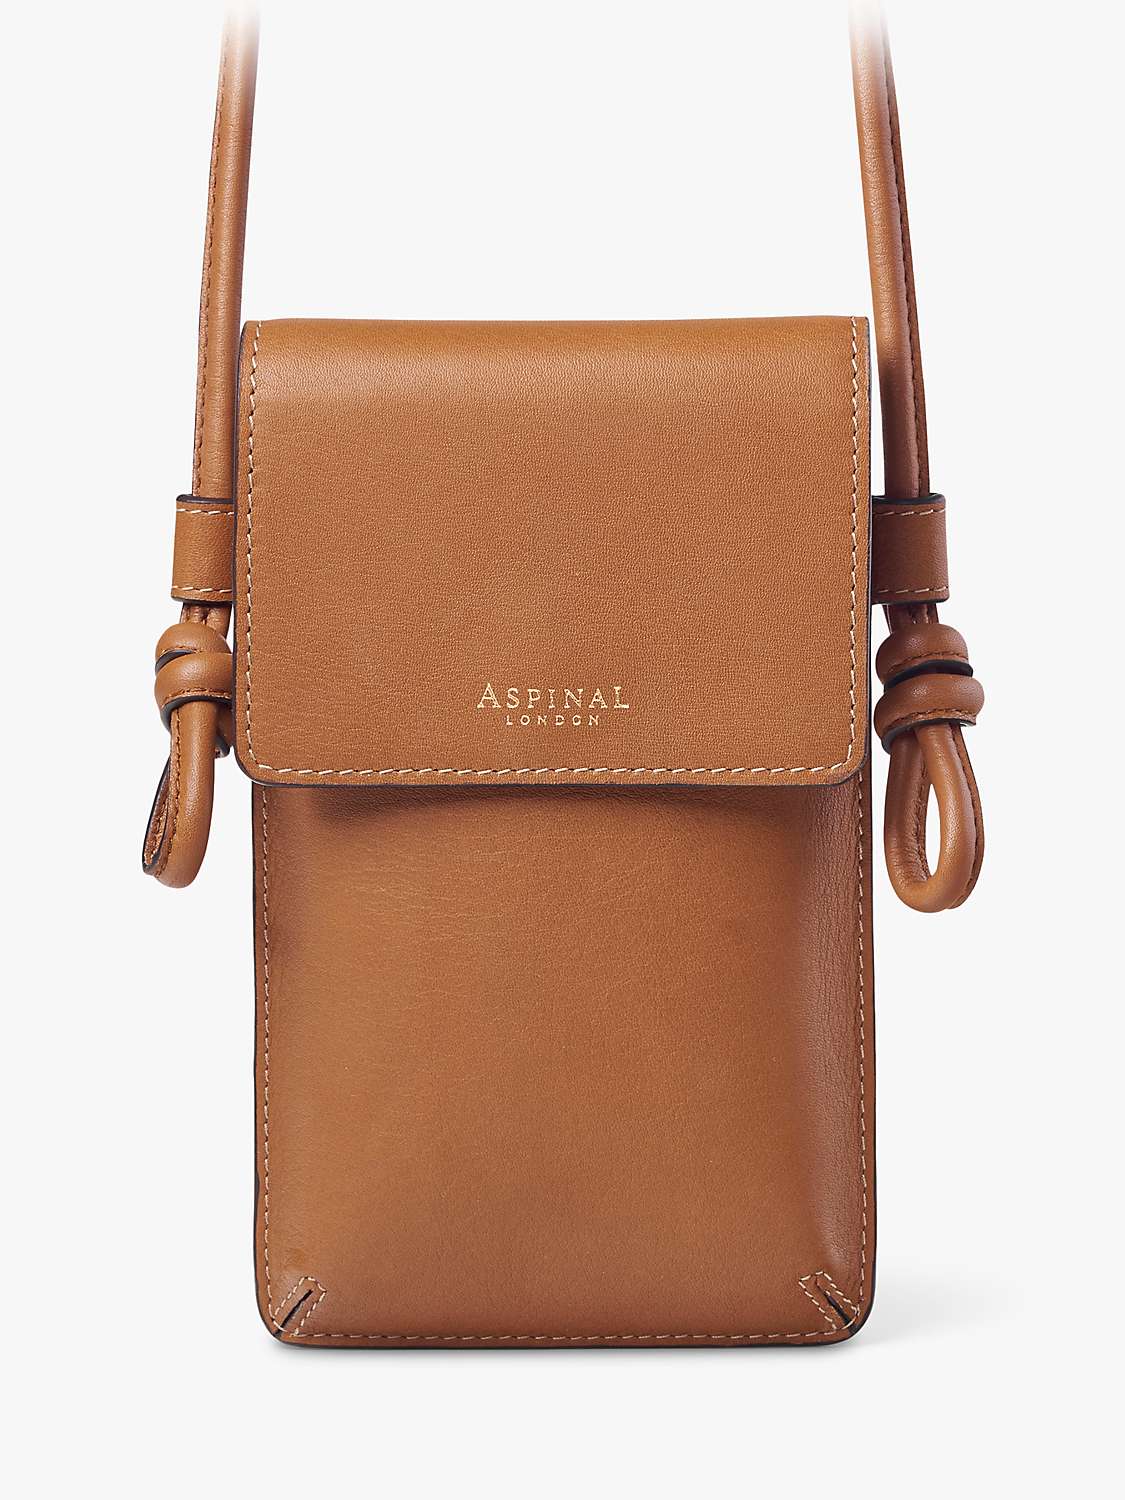 Buy Aspinal of London Ella Smooth Leather Phone Pouch, Tan Online at johnlewis.com